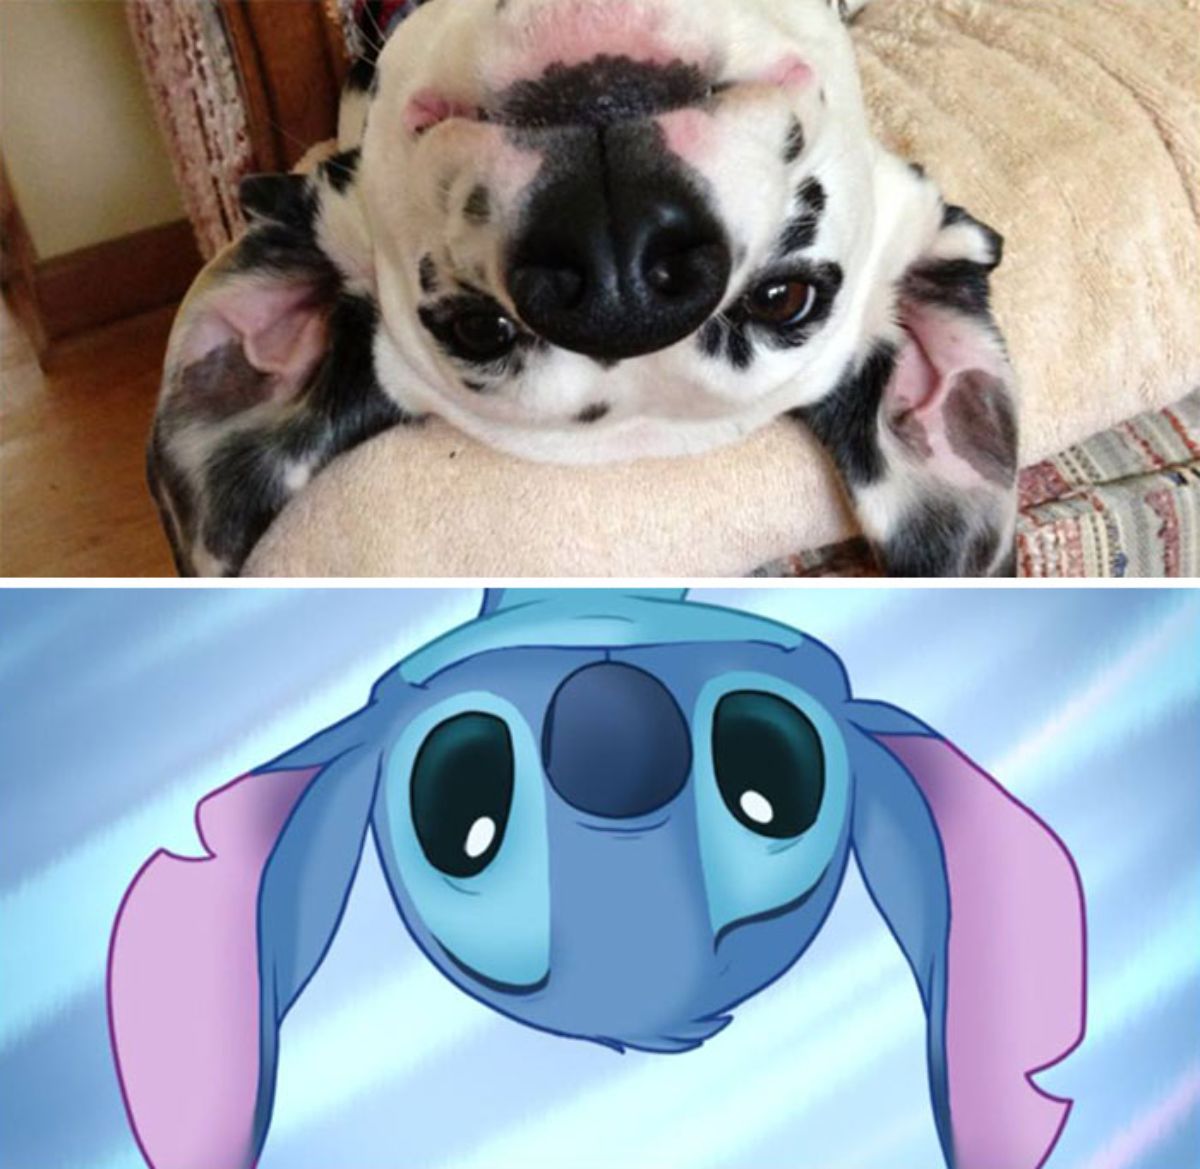 1 photo of black and white dog's face upside down and 1 photo of stitch from the cartoon with its face upside down